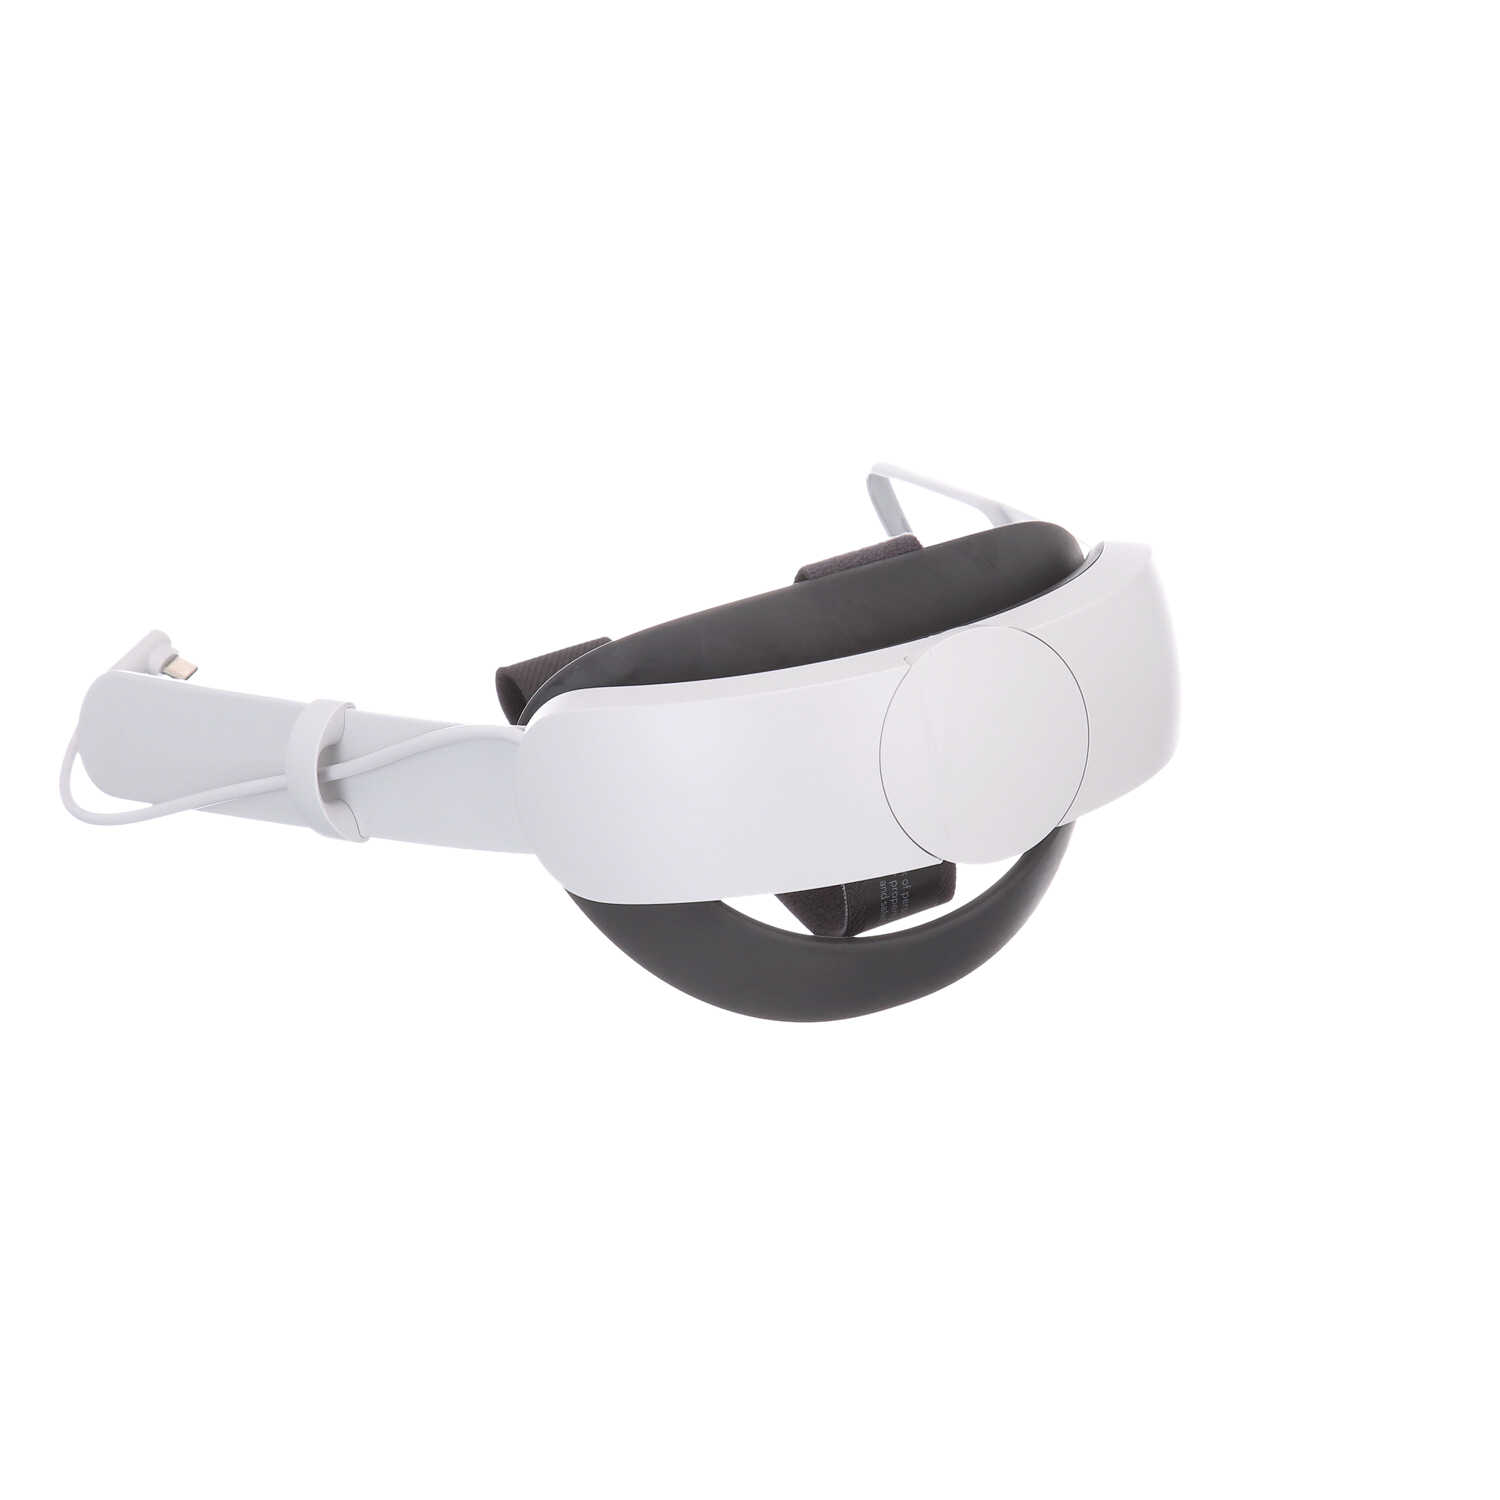 Quest 2 (Oculus) Elite Strap with Battery for Enhanced Comfort and